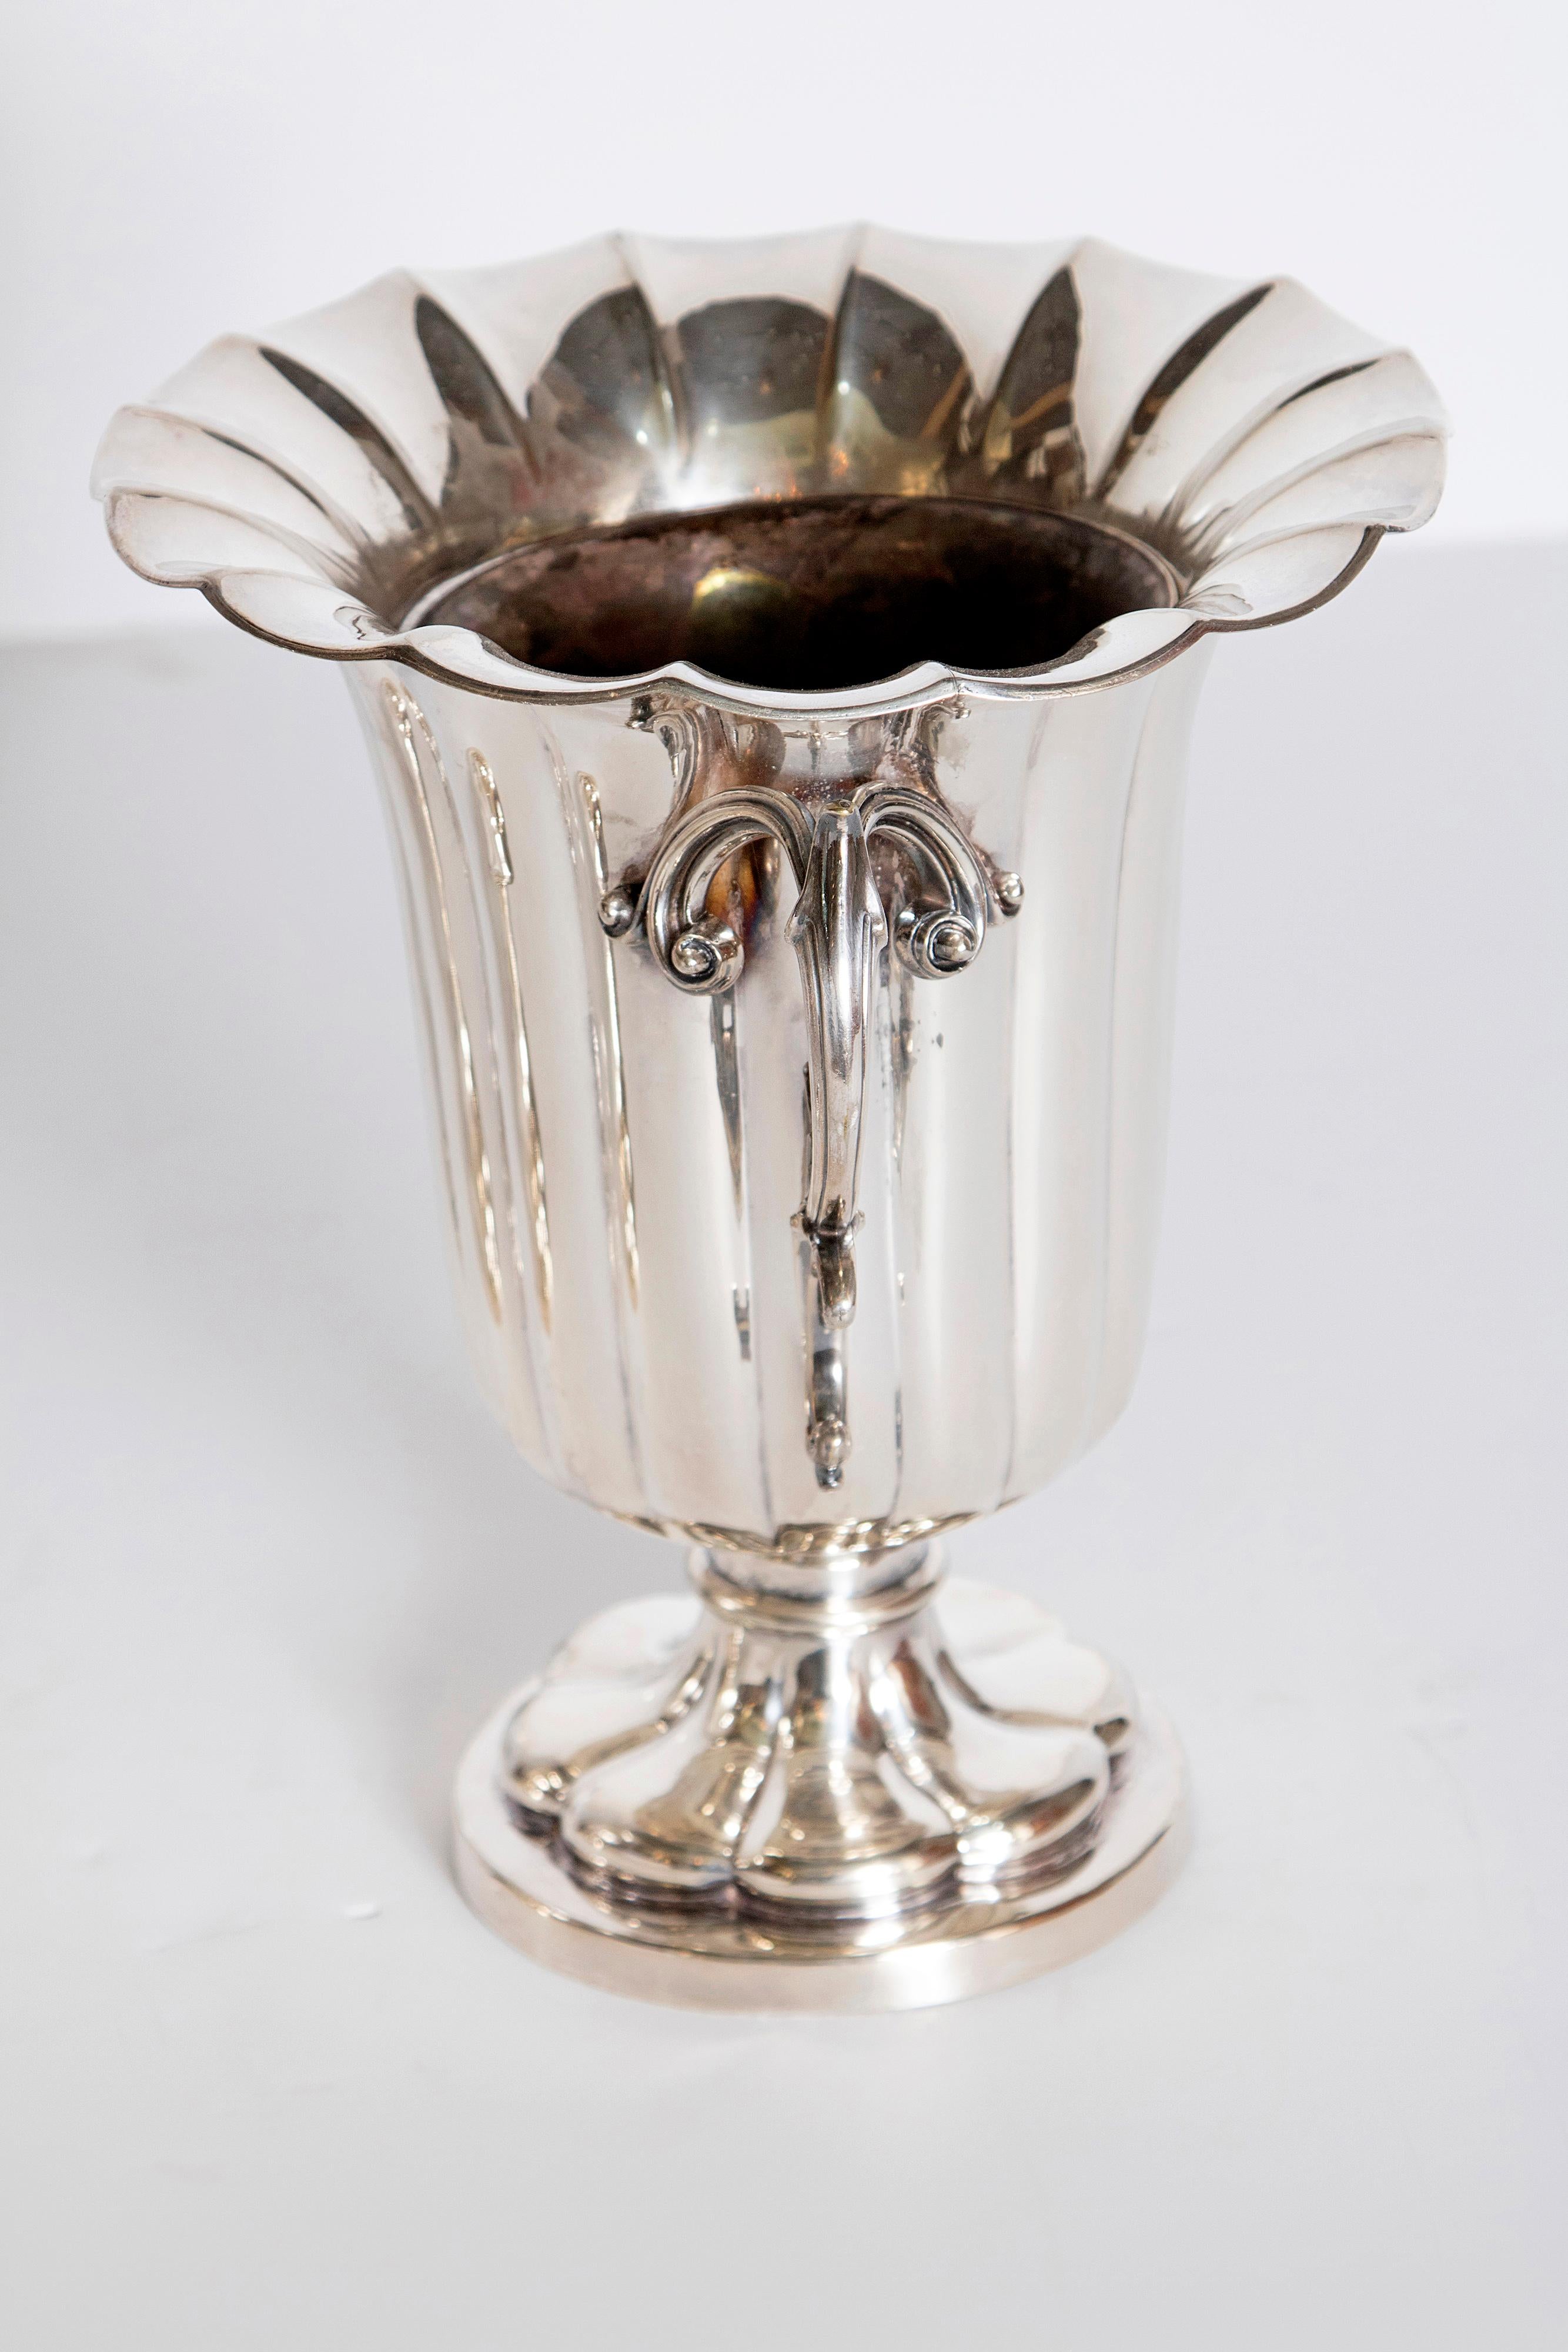 Victorian Mid-19th Century Pair of Silver Plate Ice Vases by Elkington & Co., England